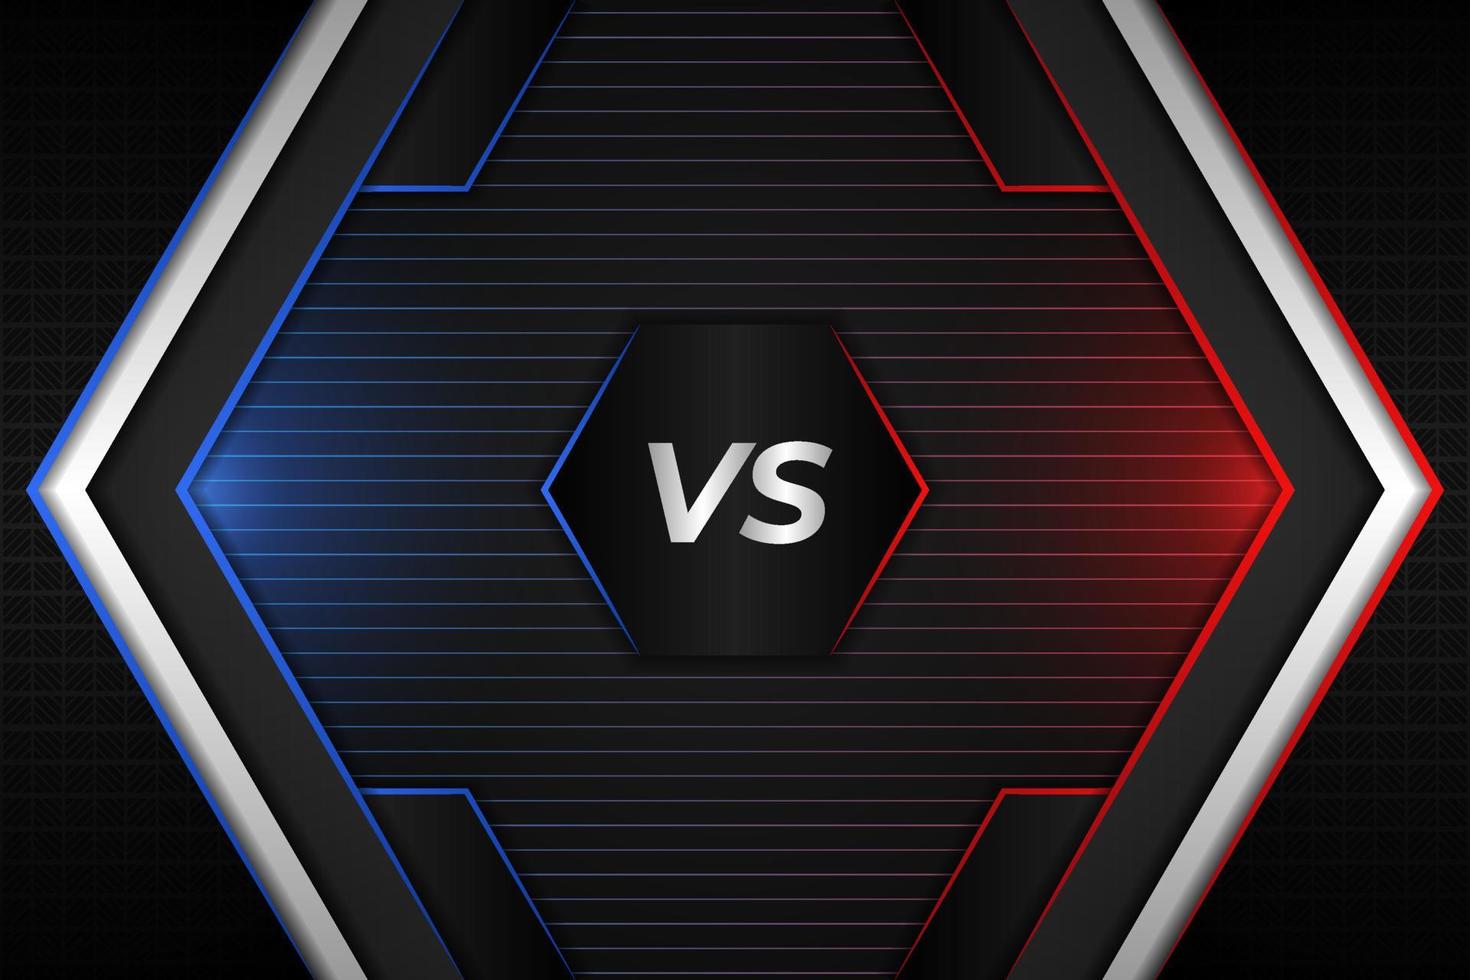 Versus Sports Battle Competition Glow Geometric Red and Blue on Dark Background vector